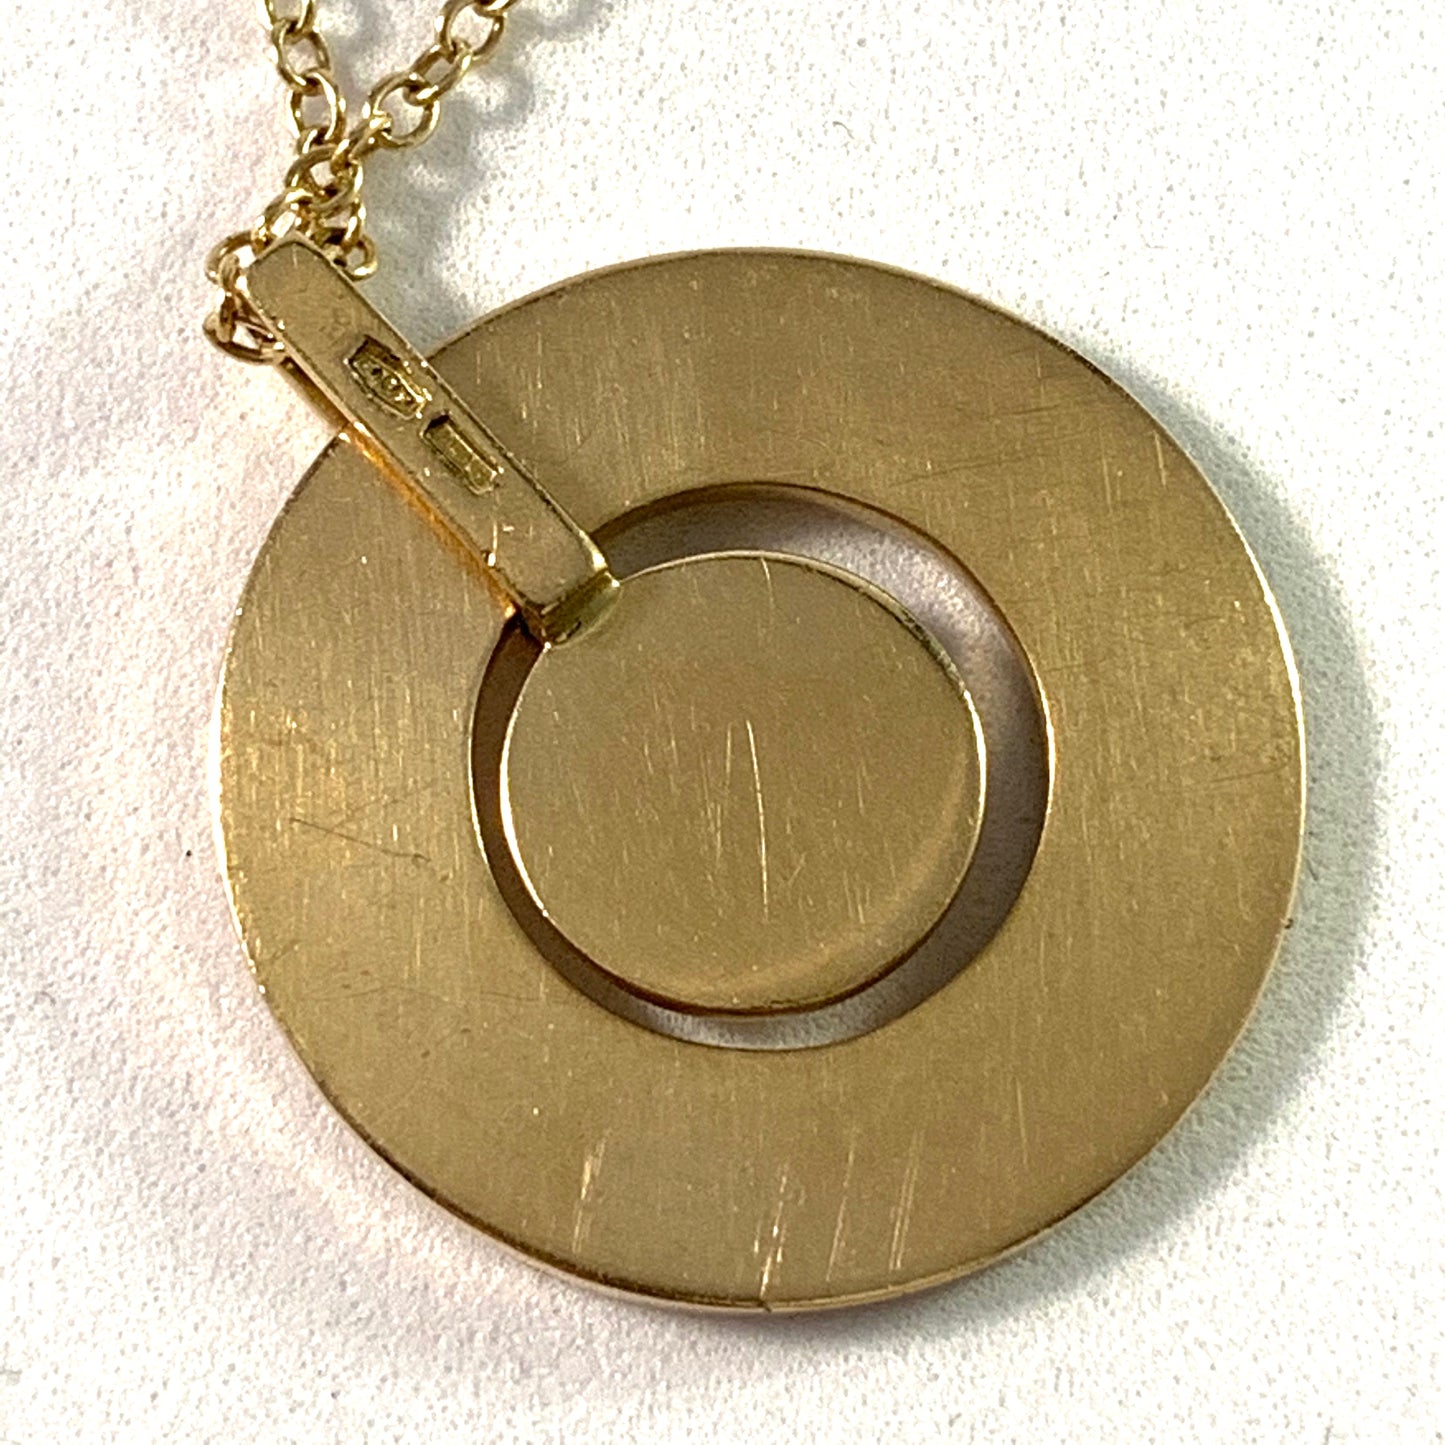 Gucci, Italy 18k Gold Pendant Necklace. Boxed.